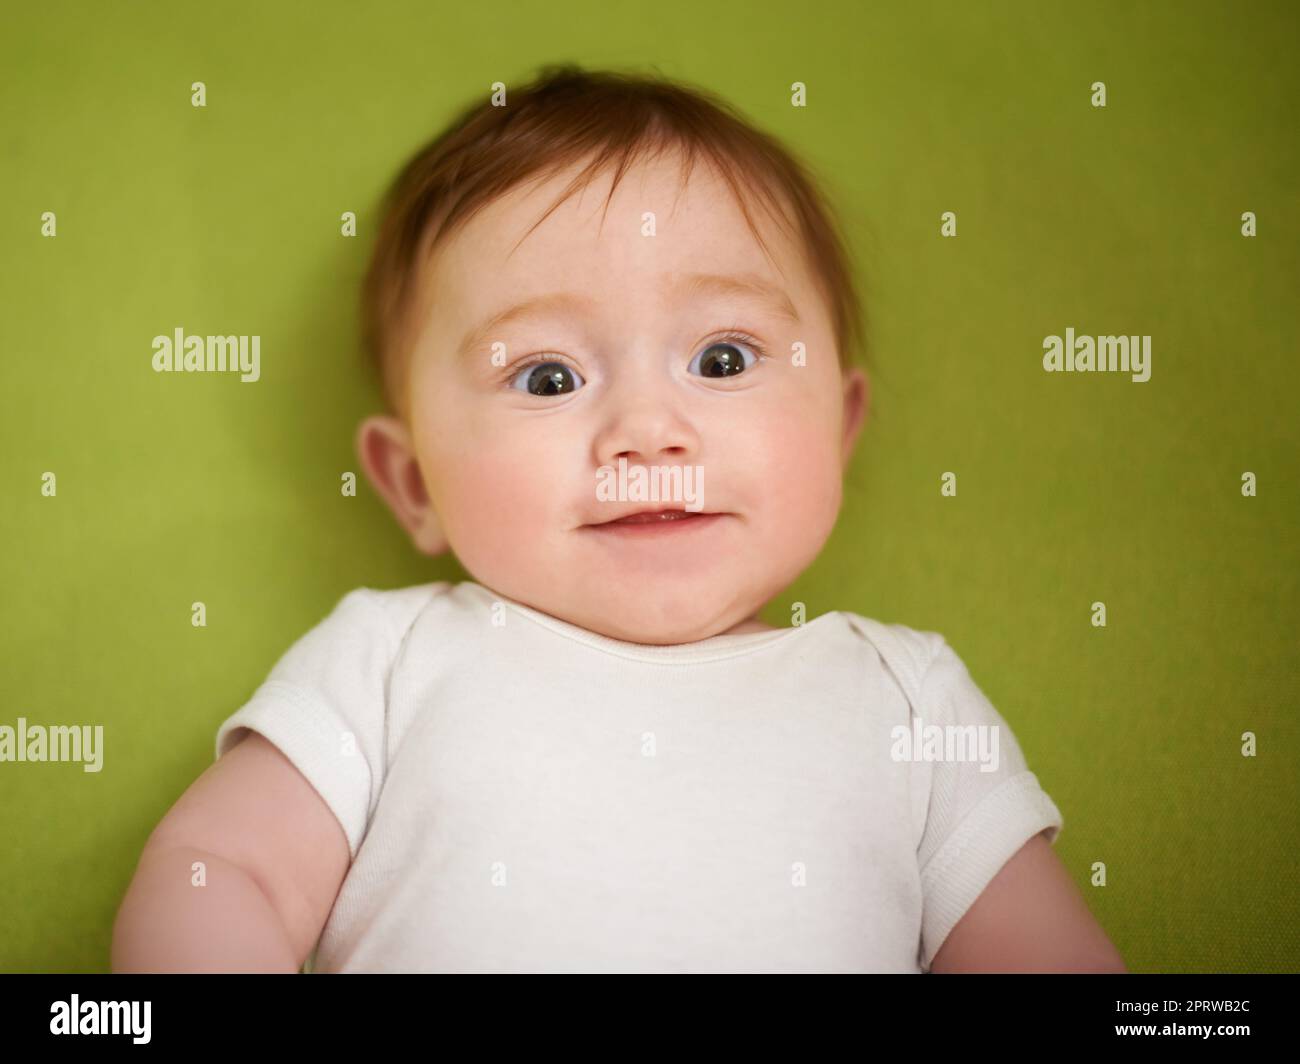 Shes an adorable bundle of joy. an adorable baby girl with red hair. Stock Photo